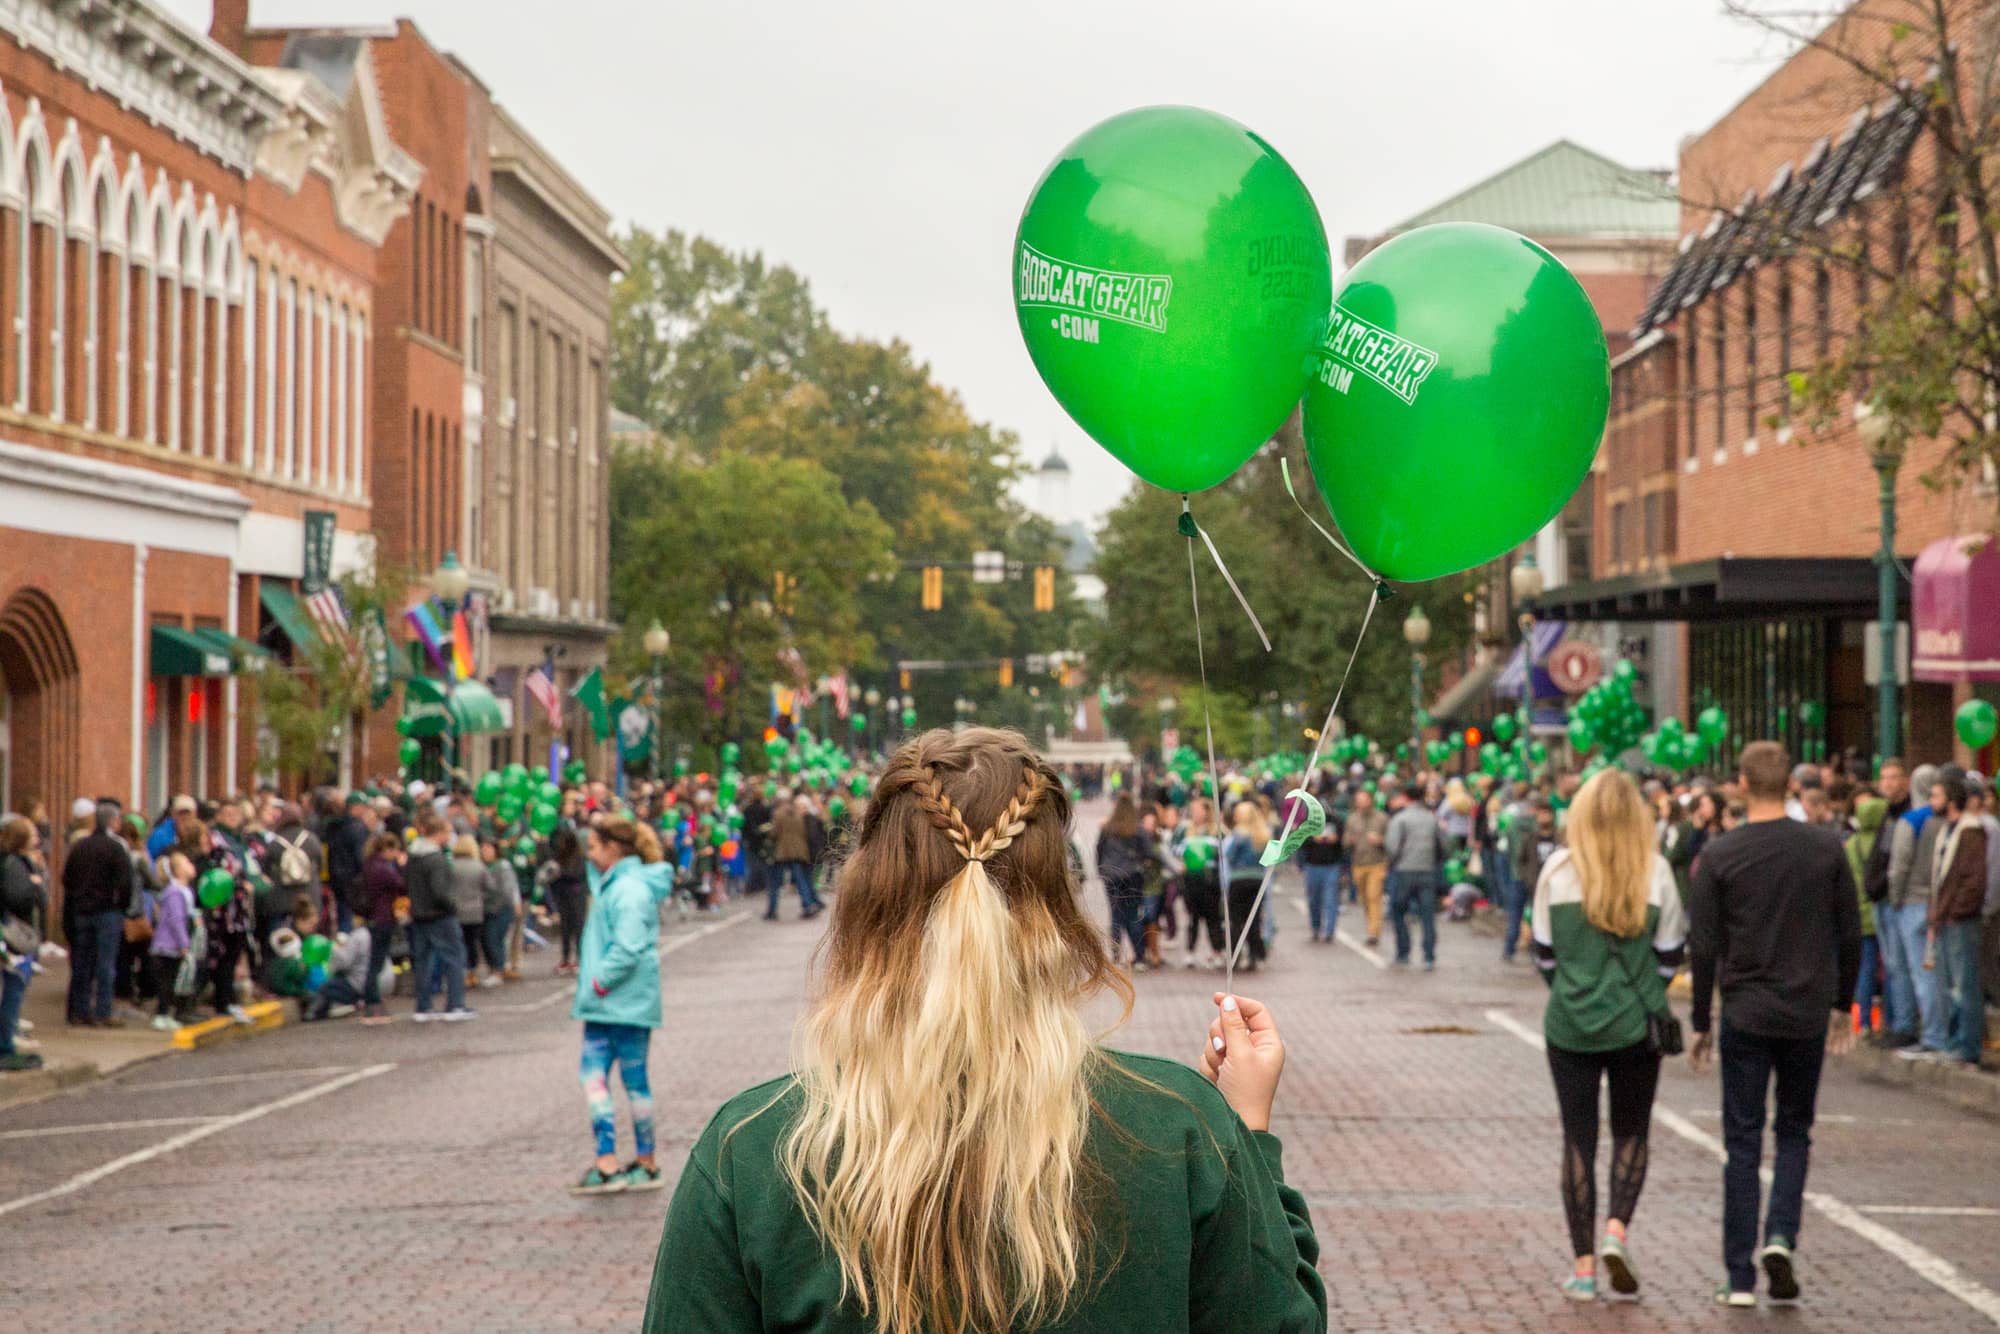 Photographs of the 2018 Ohio University Homecoming Parade in Uptown Athens, Ohio on October 20, 2018.